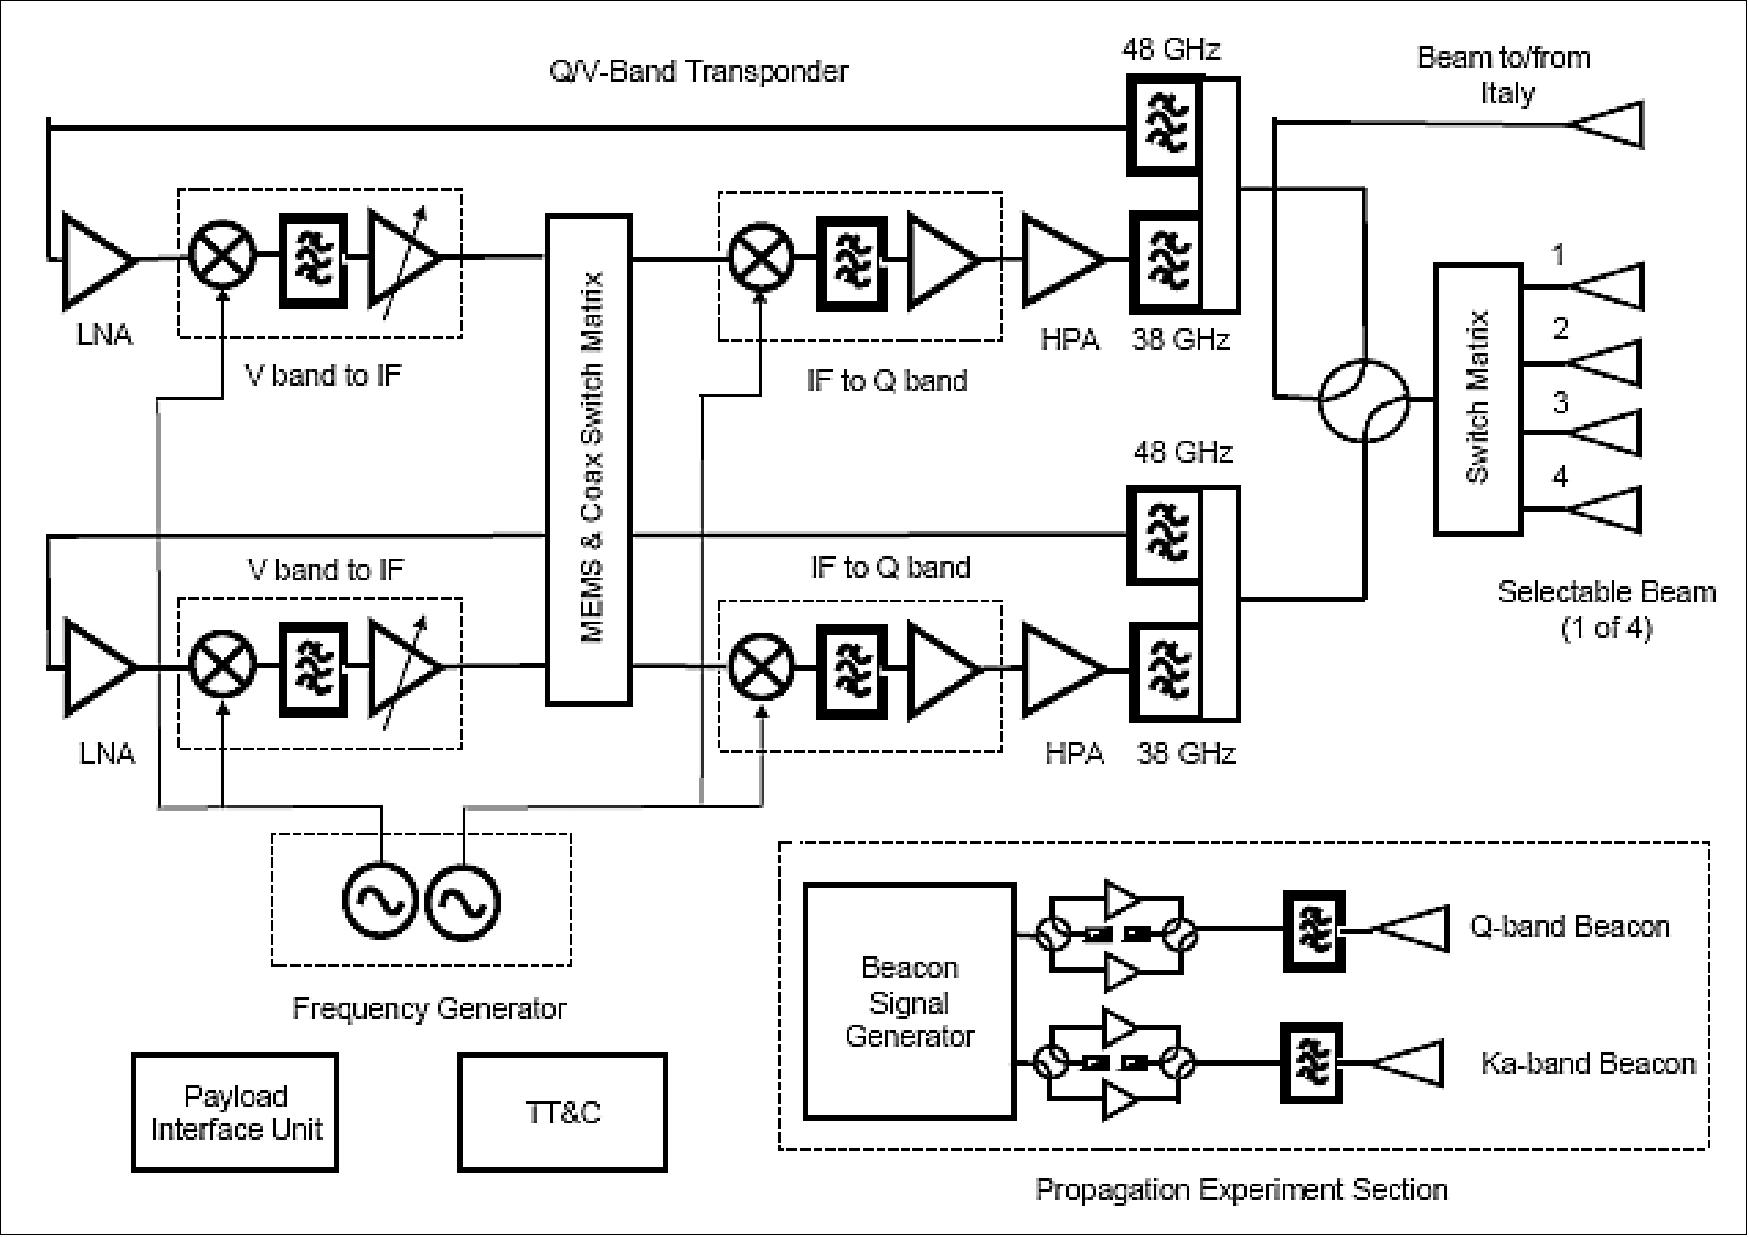 Figure 37: Alphasat Q/V-band payloads block diagram including propagation section (image credit: ASI)